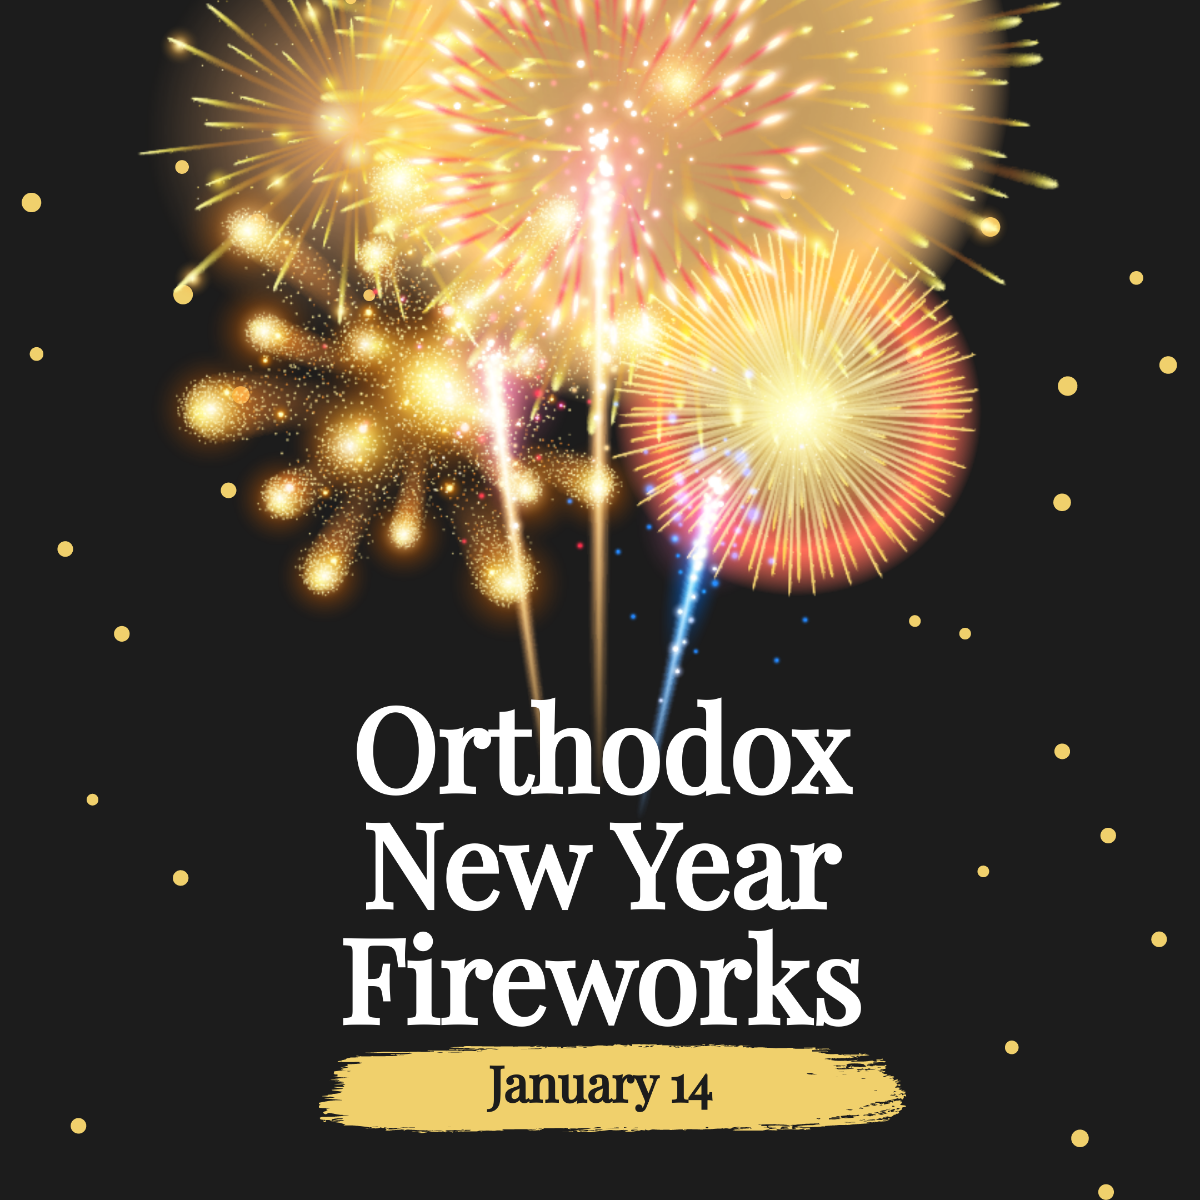 Free Orthodox New Year Fireworks Instagram Post Template